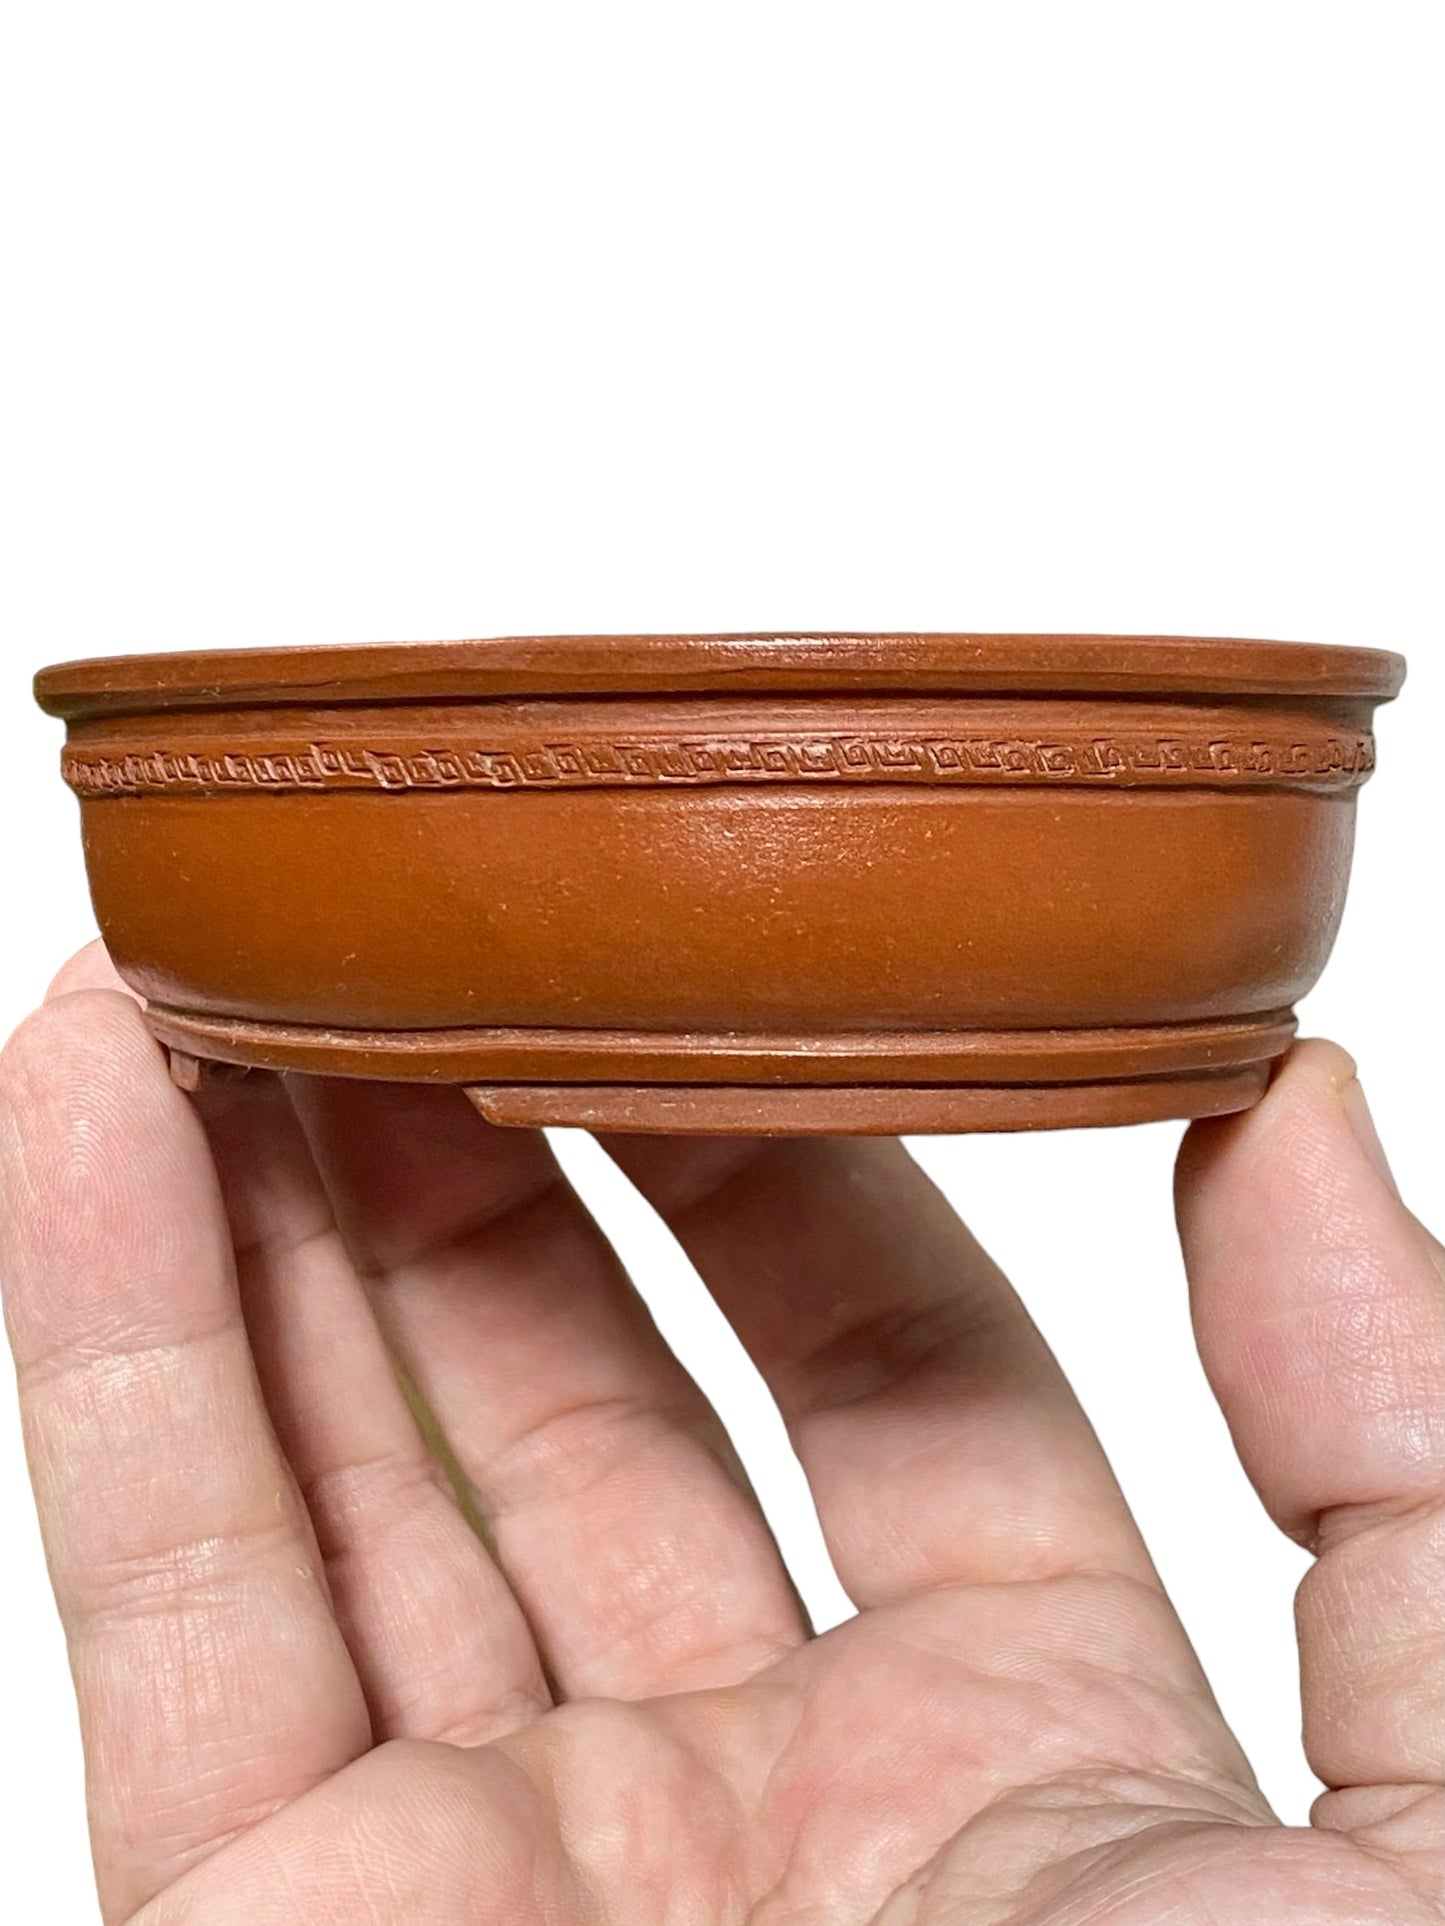 Zhang - Banded Unglazed Oval Bonsai Pot with Carving Detail